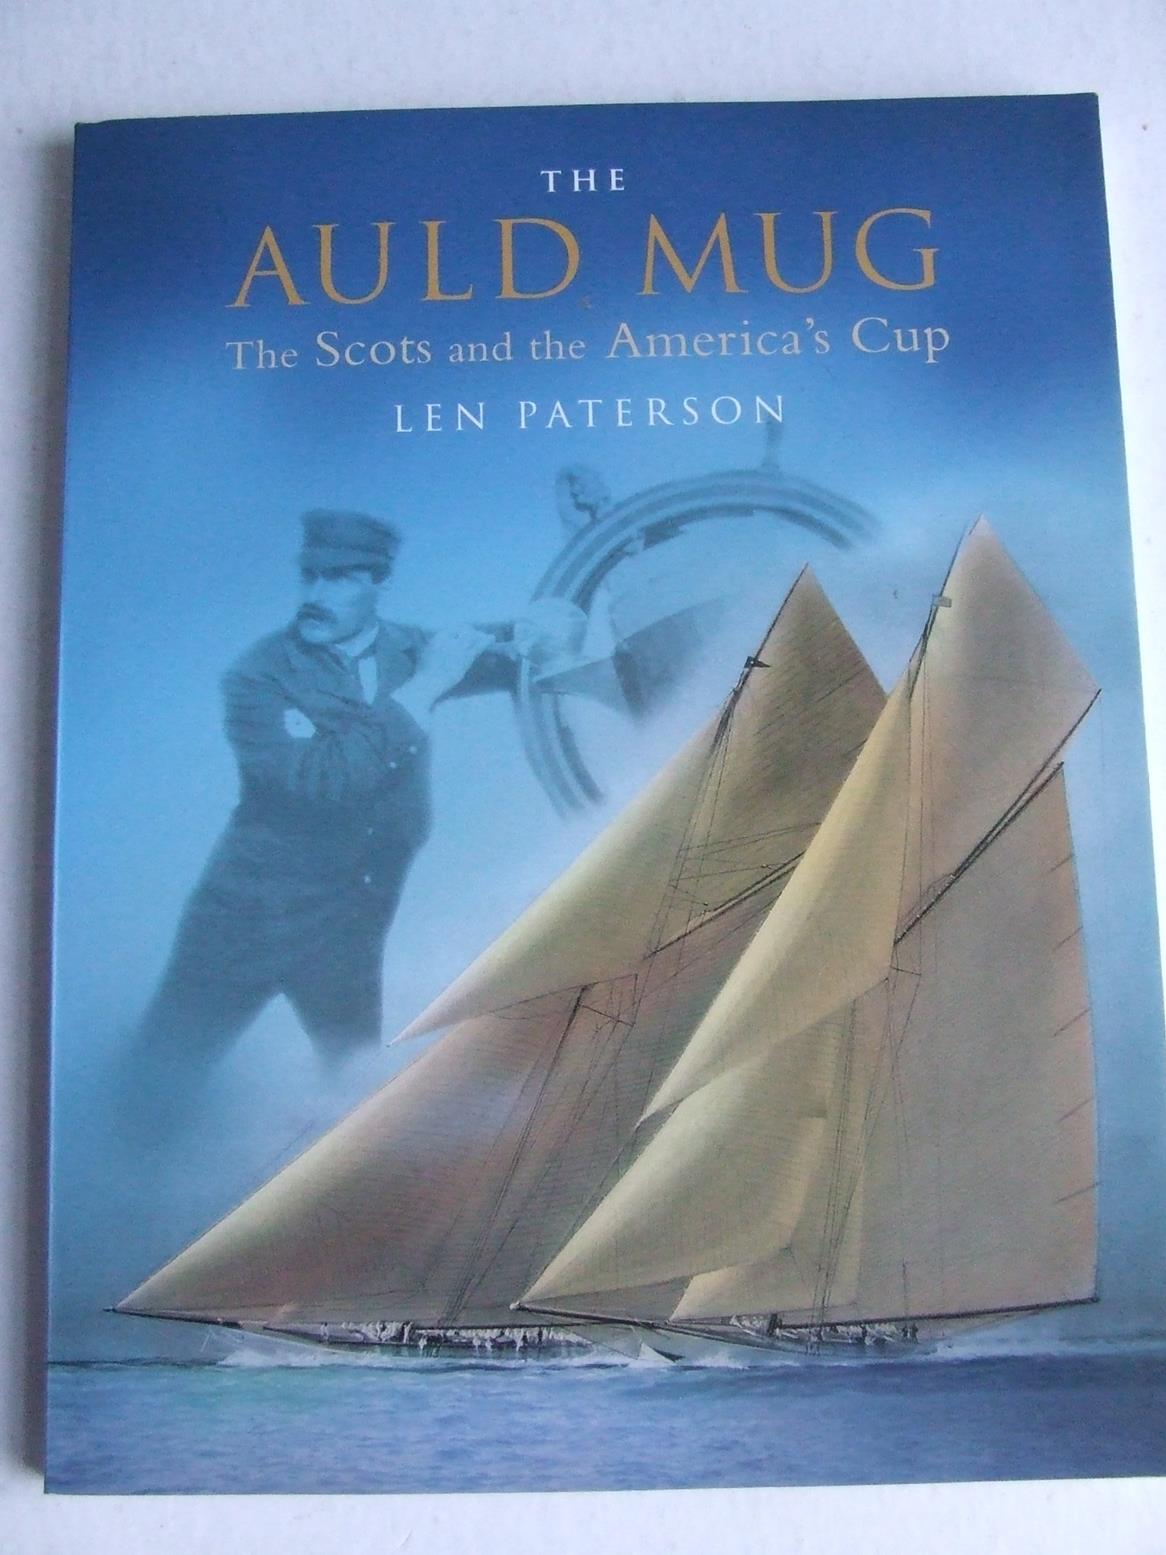 The Auld Mug, the Scots and the America's Cup